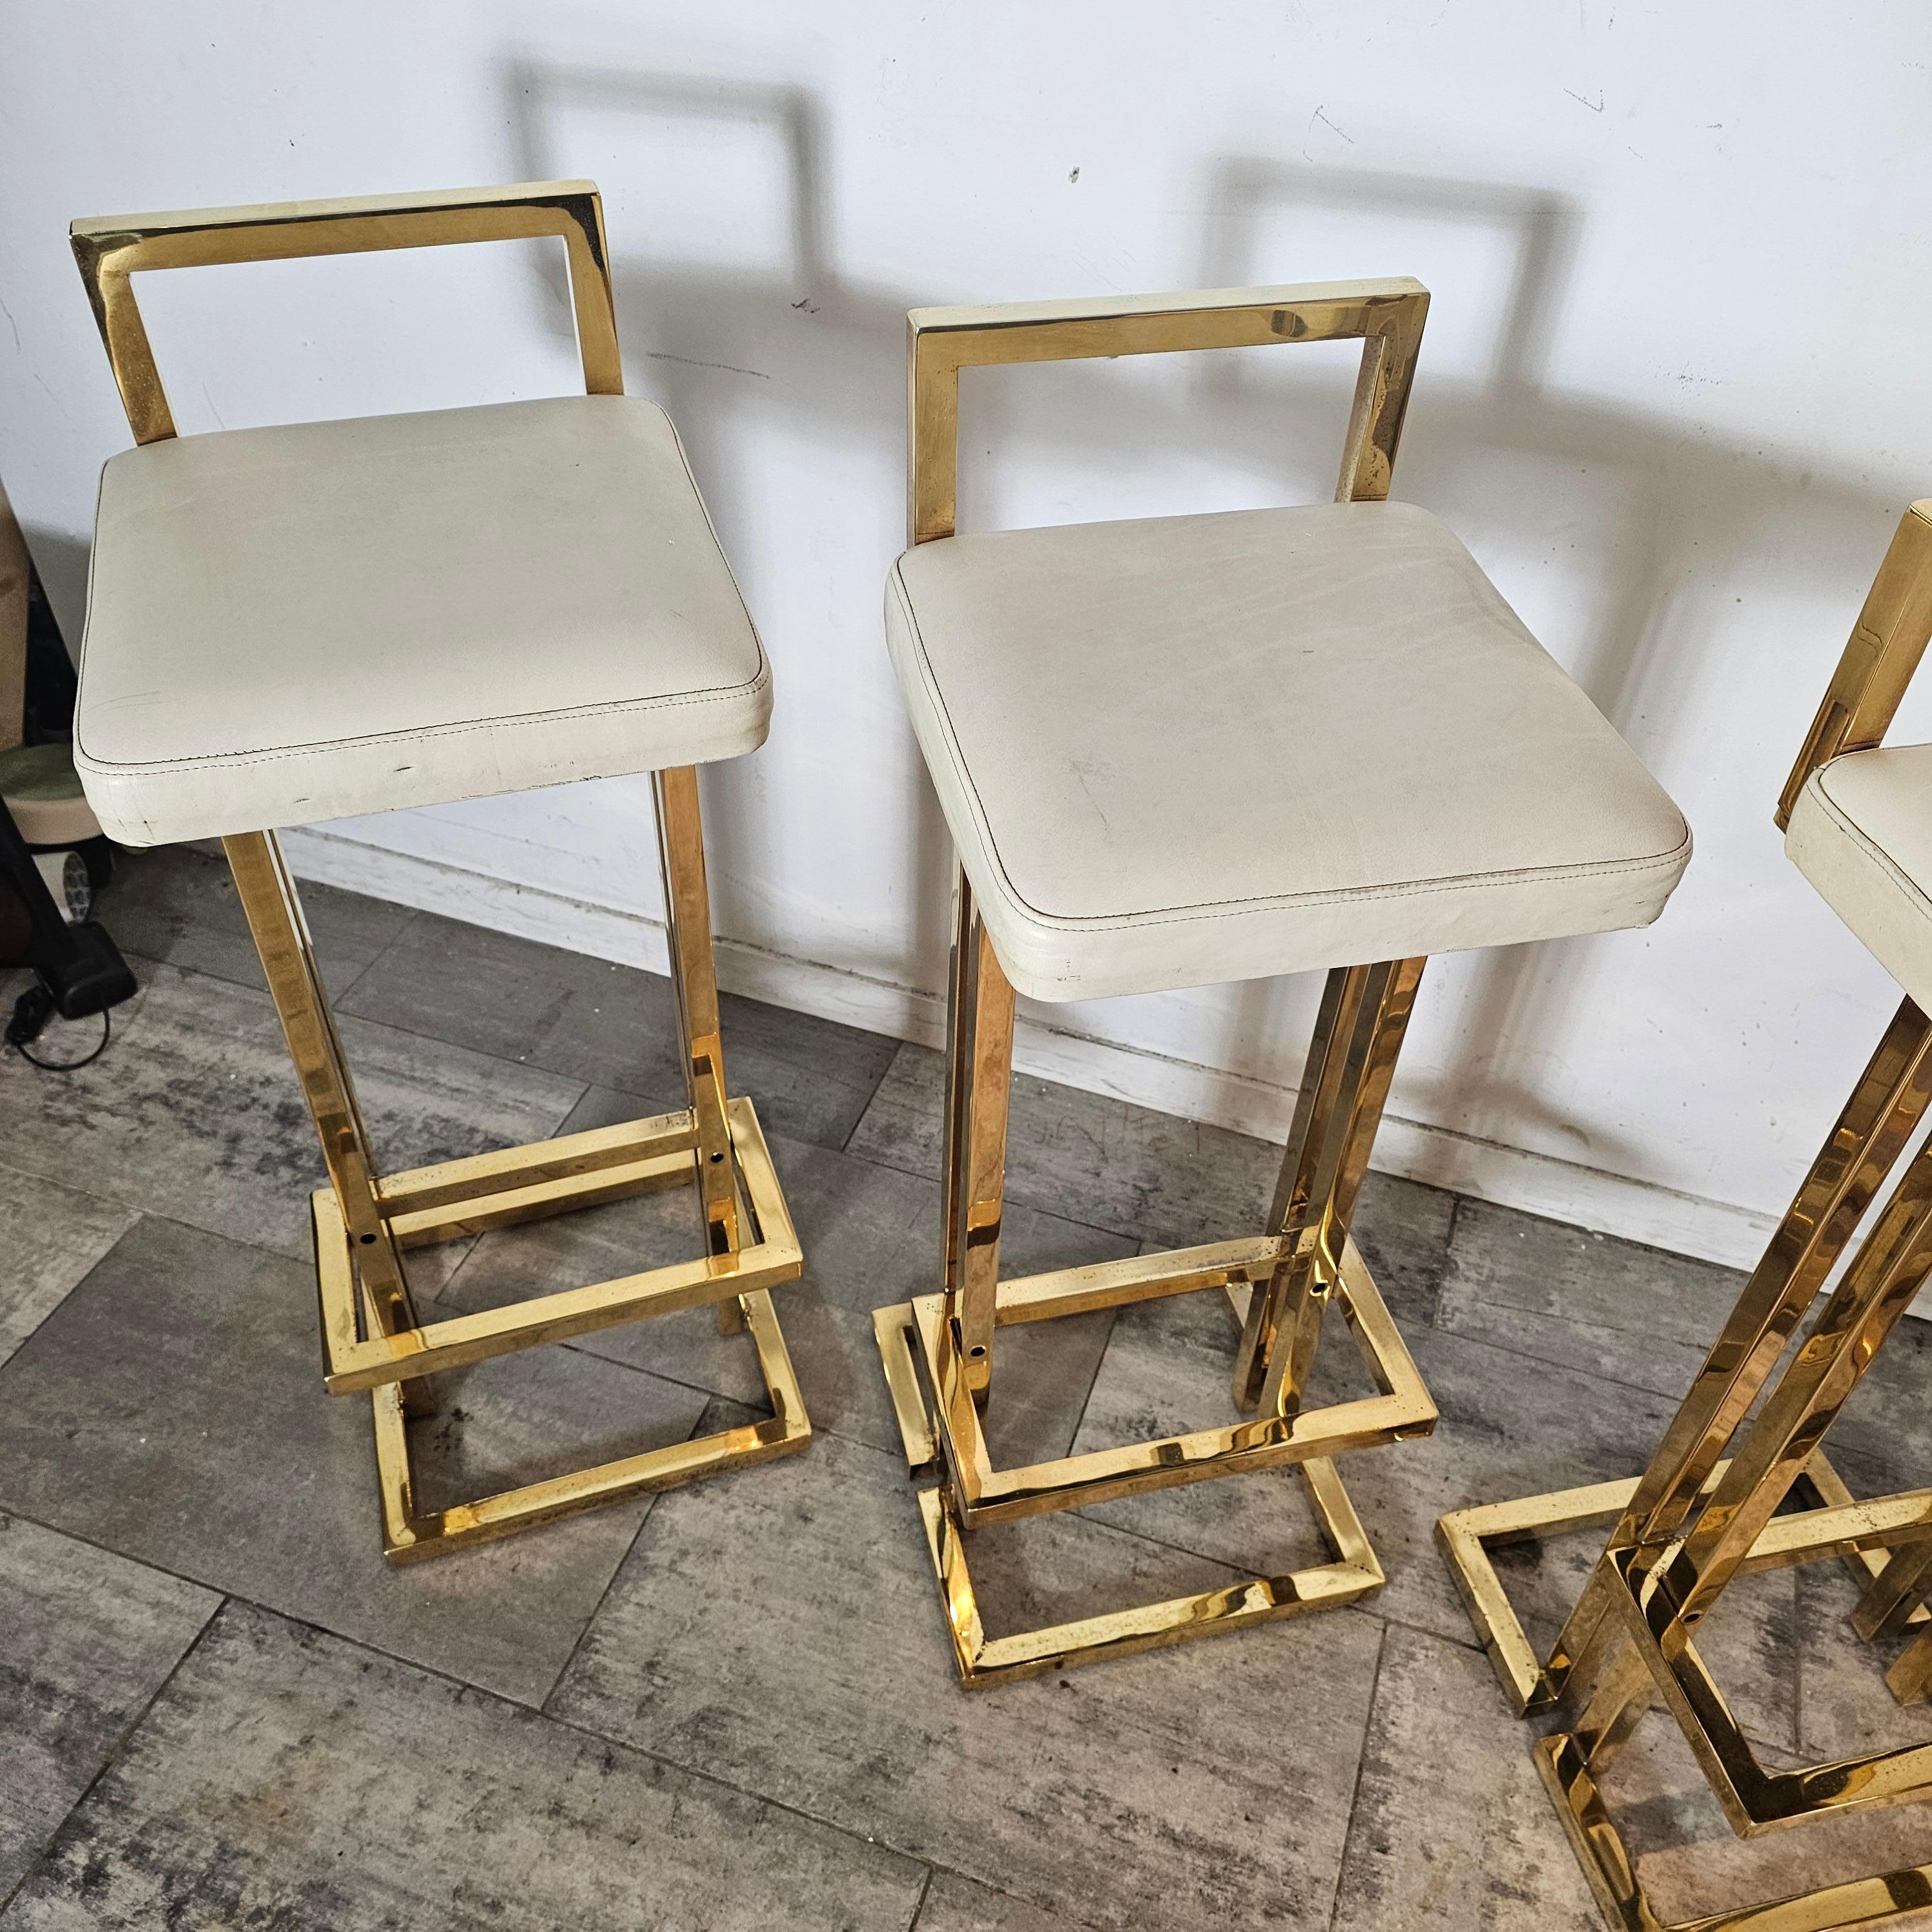 Brass Set of 4 Bar Stools in the Style of 